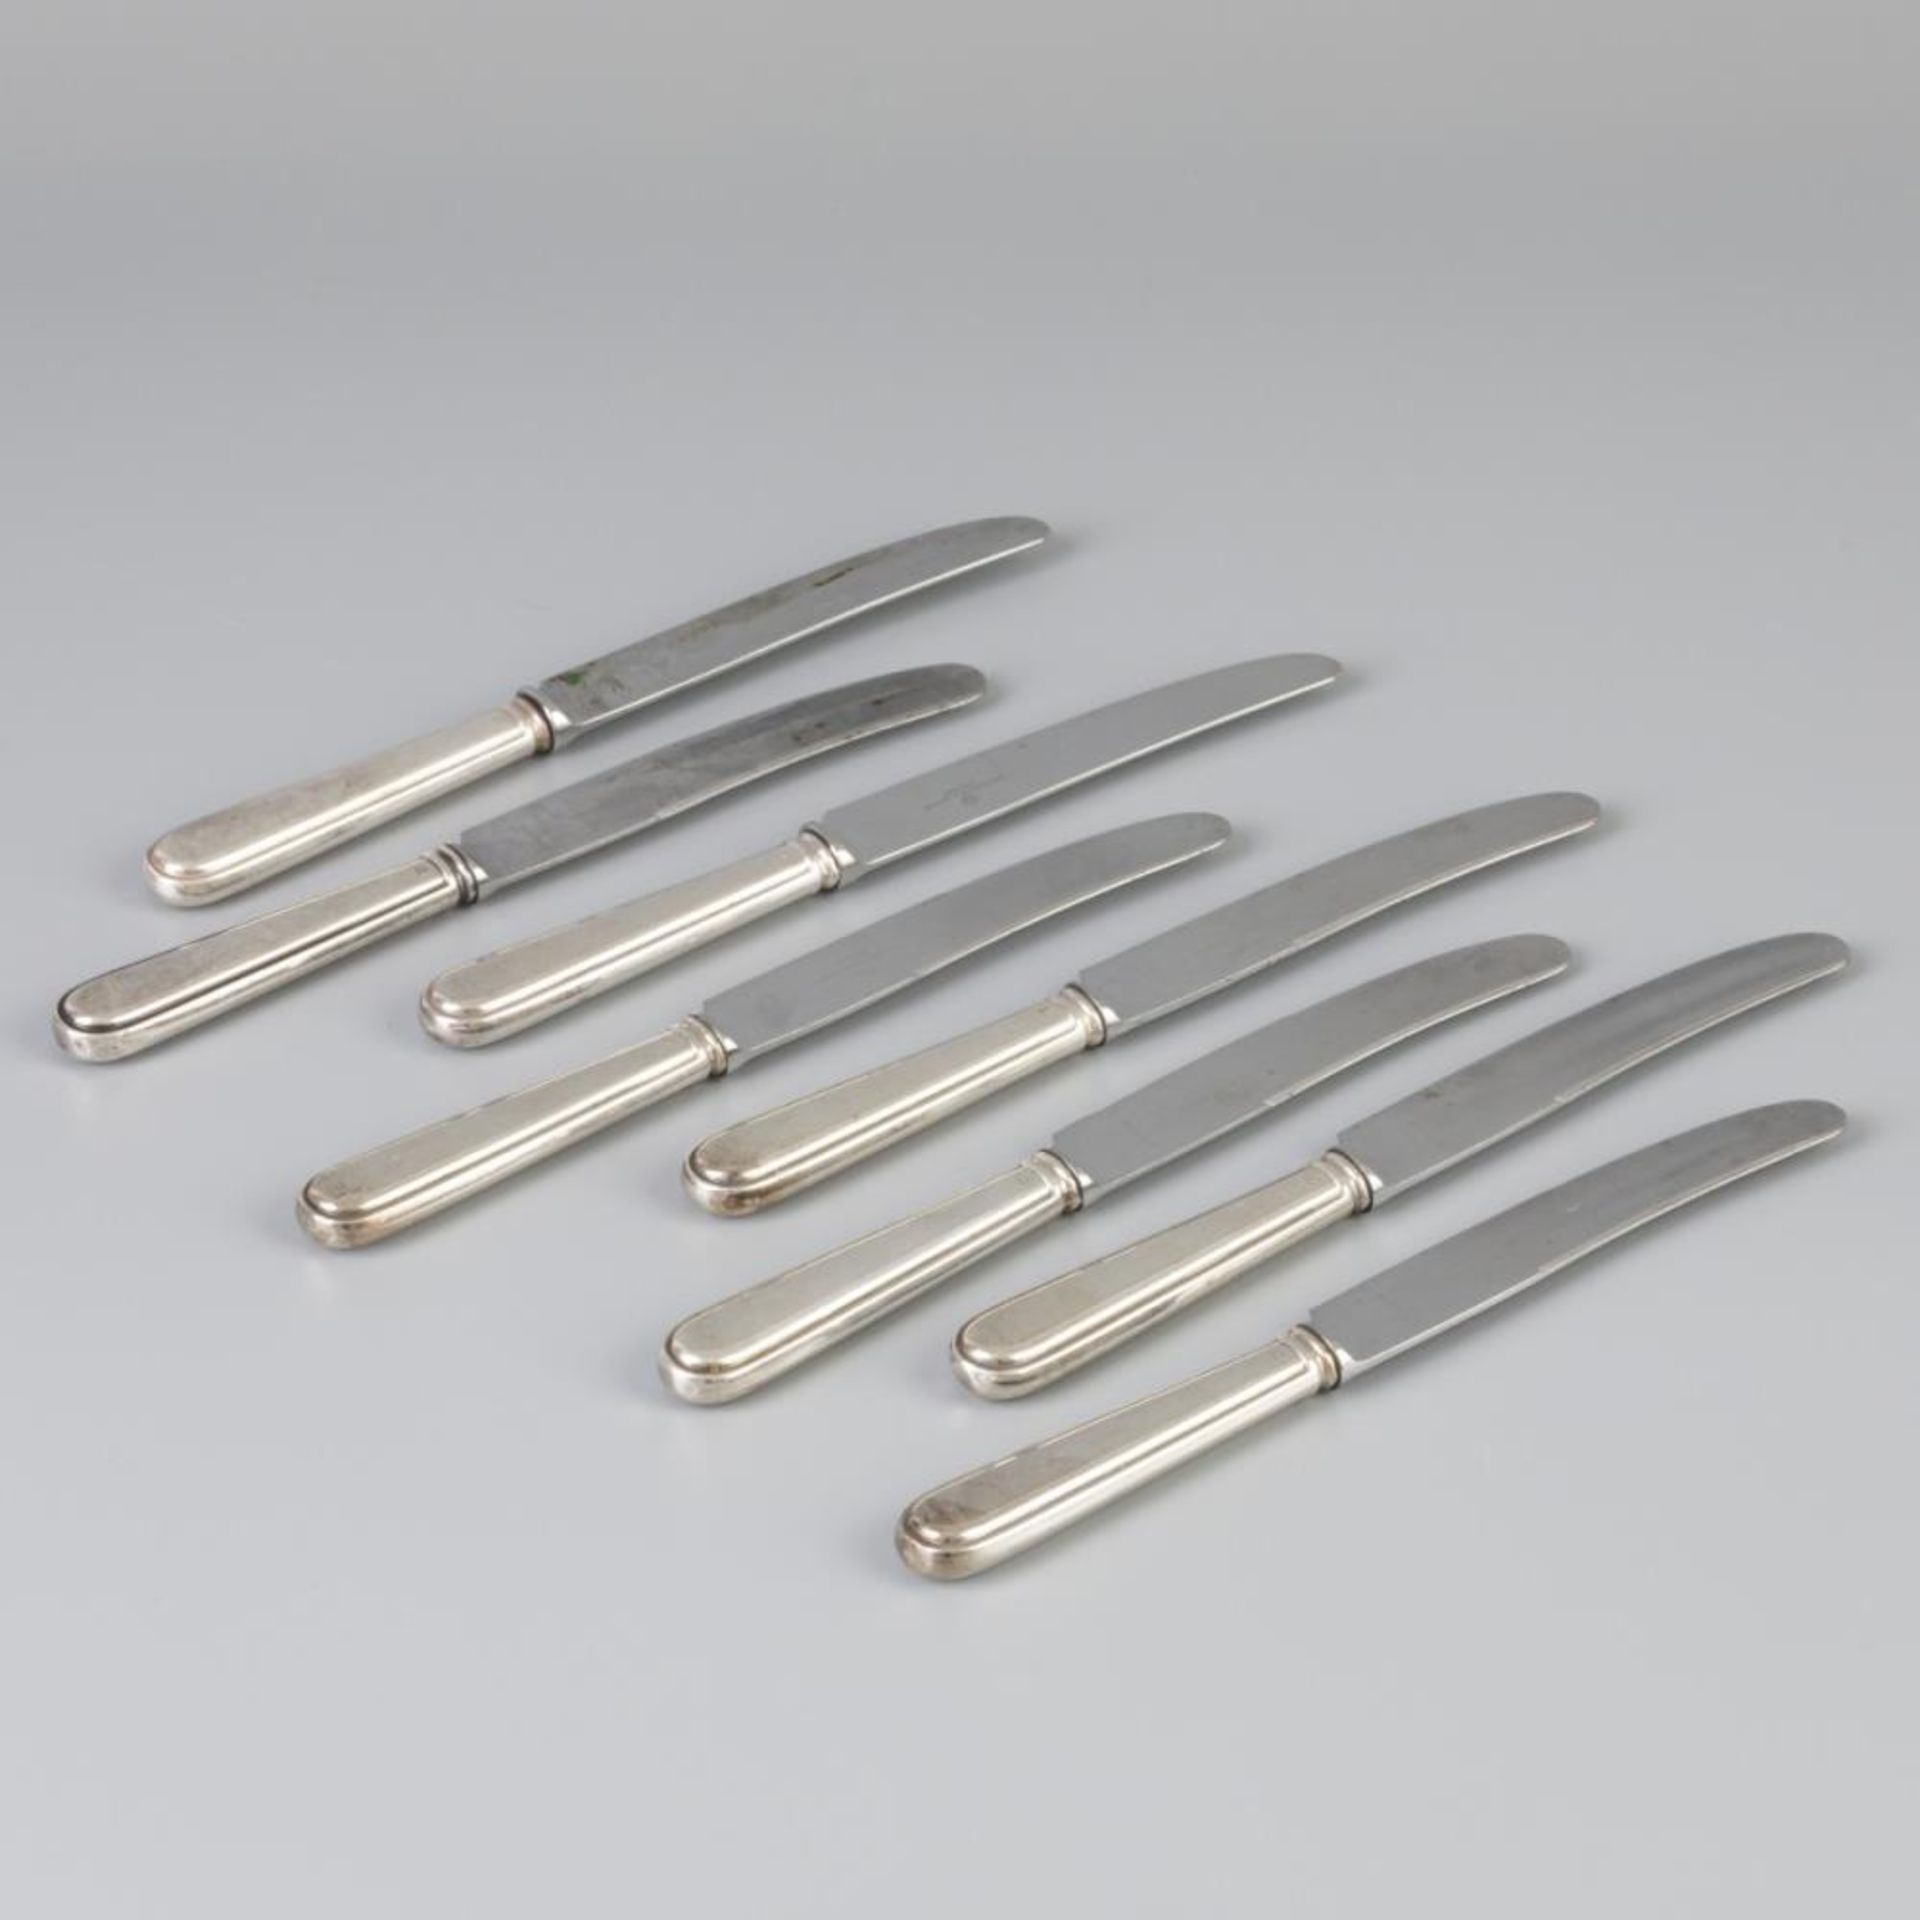 8 piece set of knives silver.